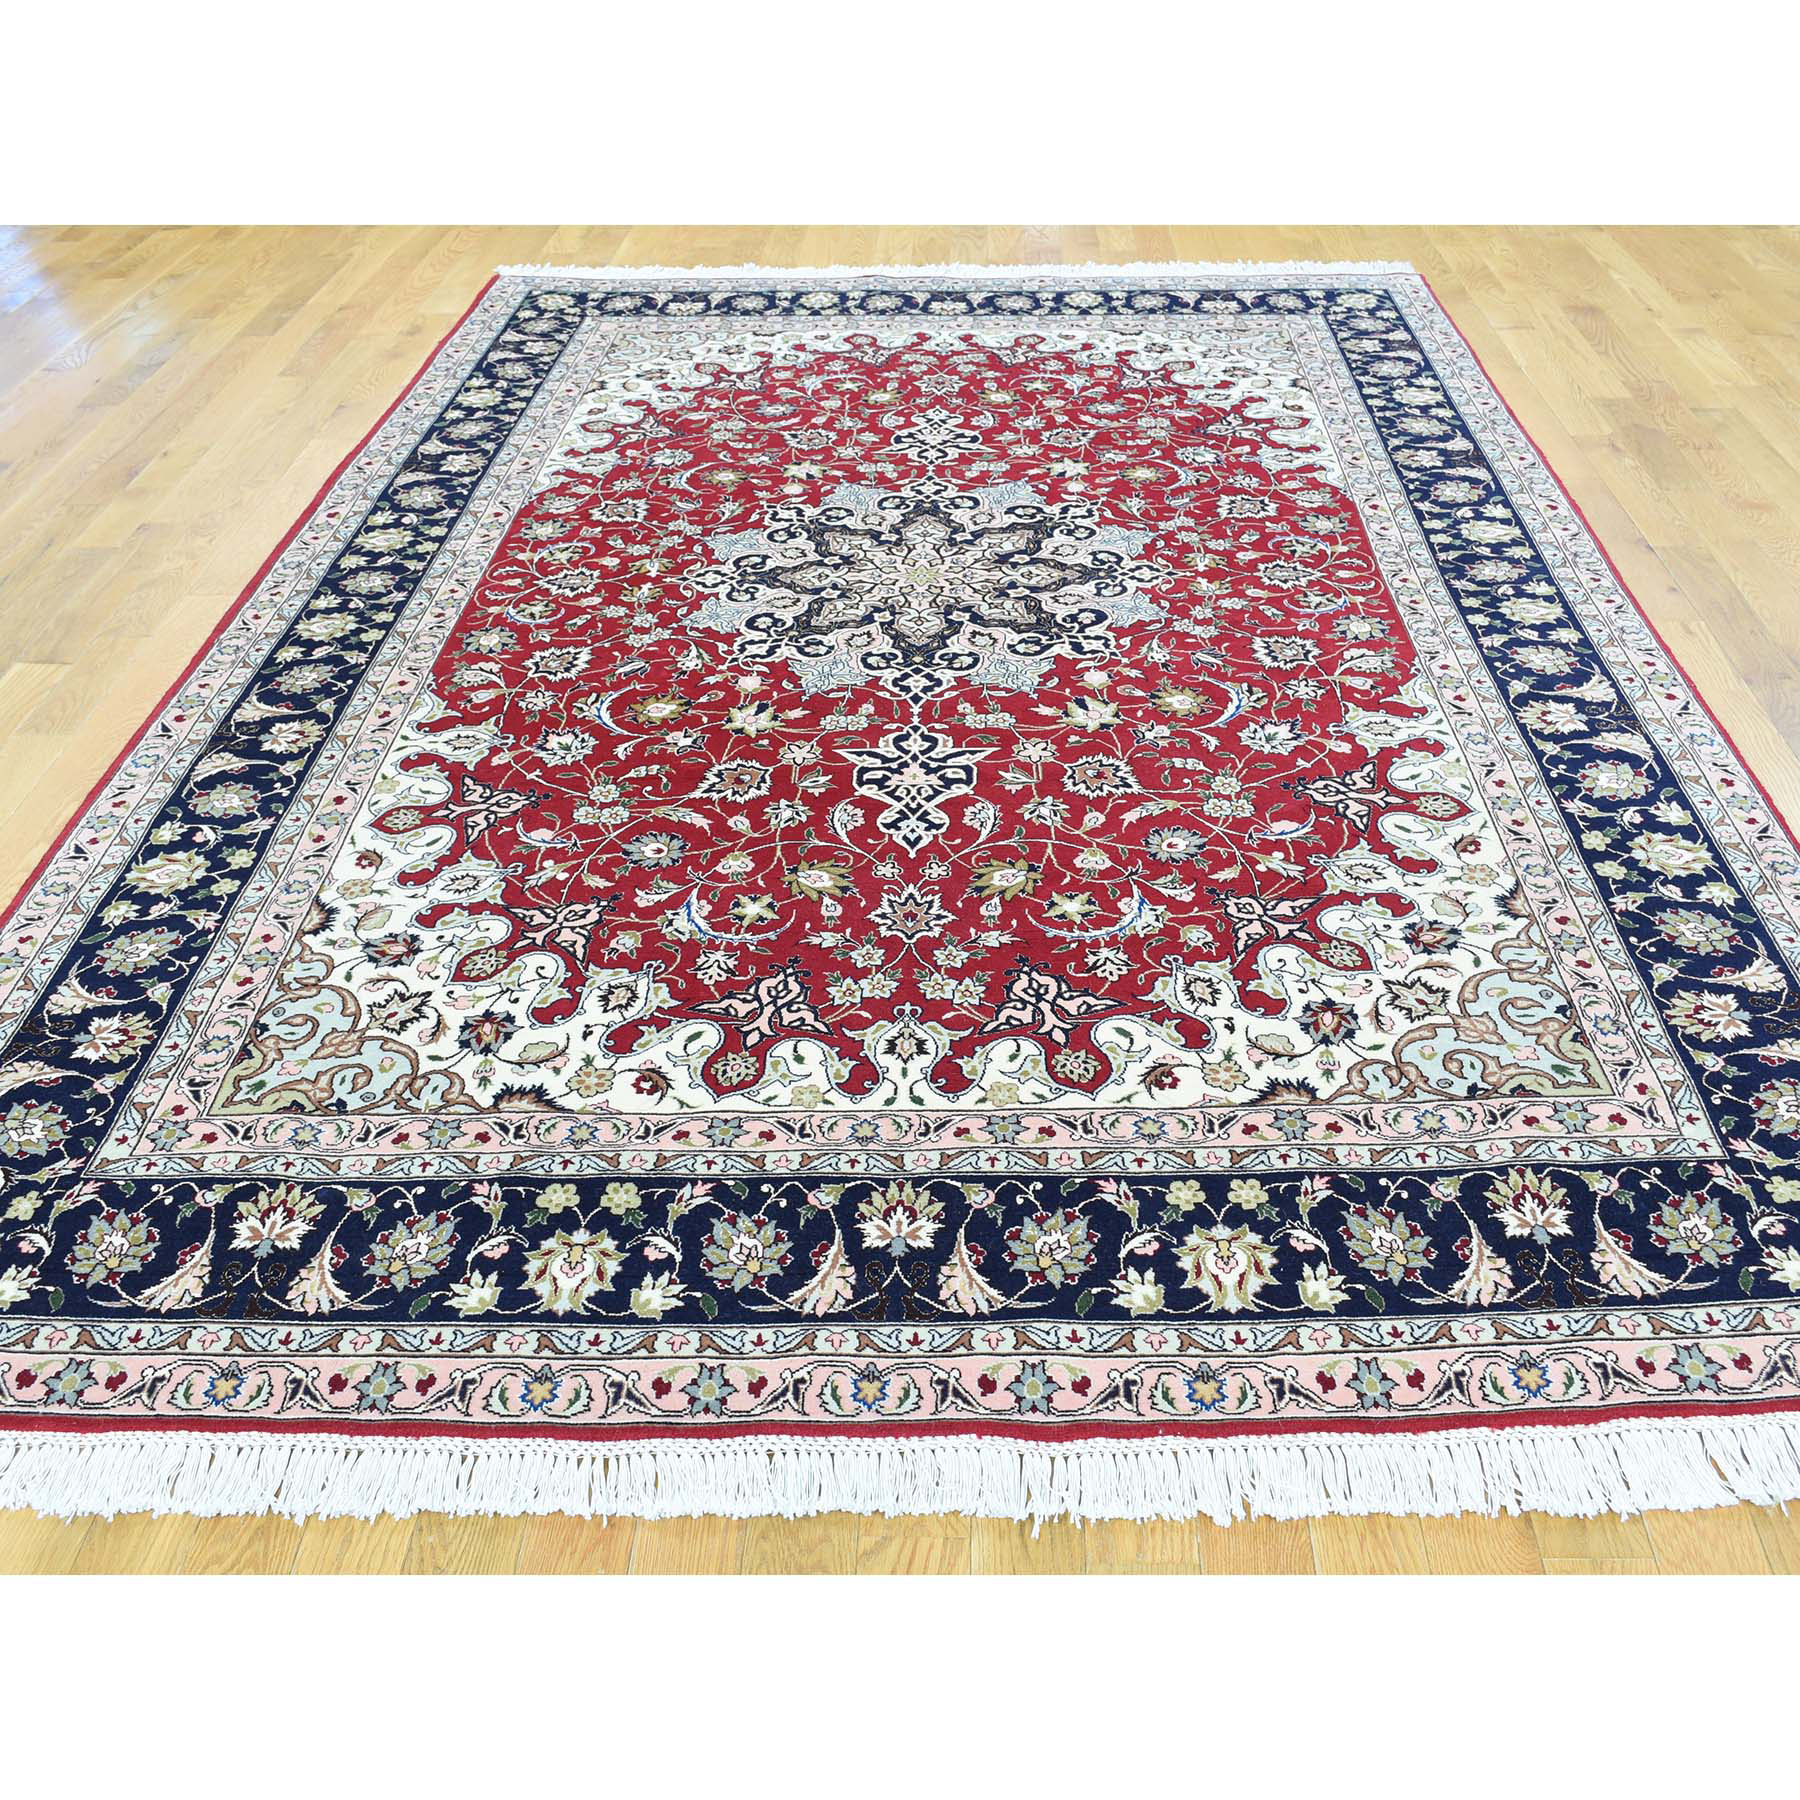 6-6 x10- Hand-Knotted Persian Tabriz Wool And Silk 400 KPSI Oriental Rug 